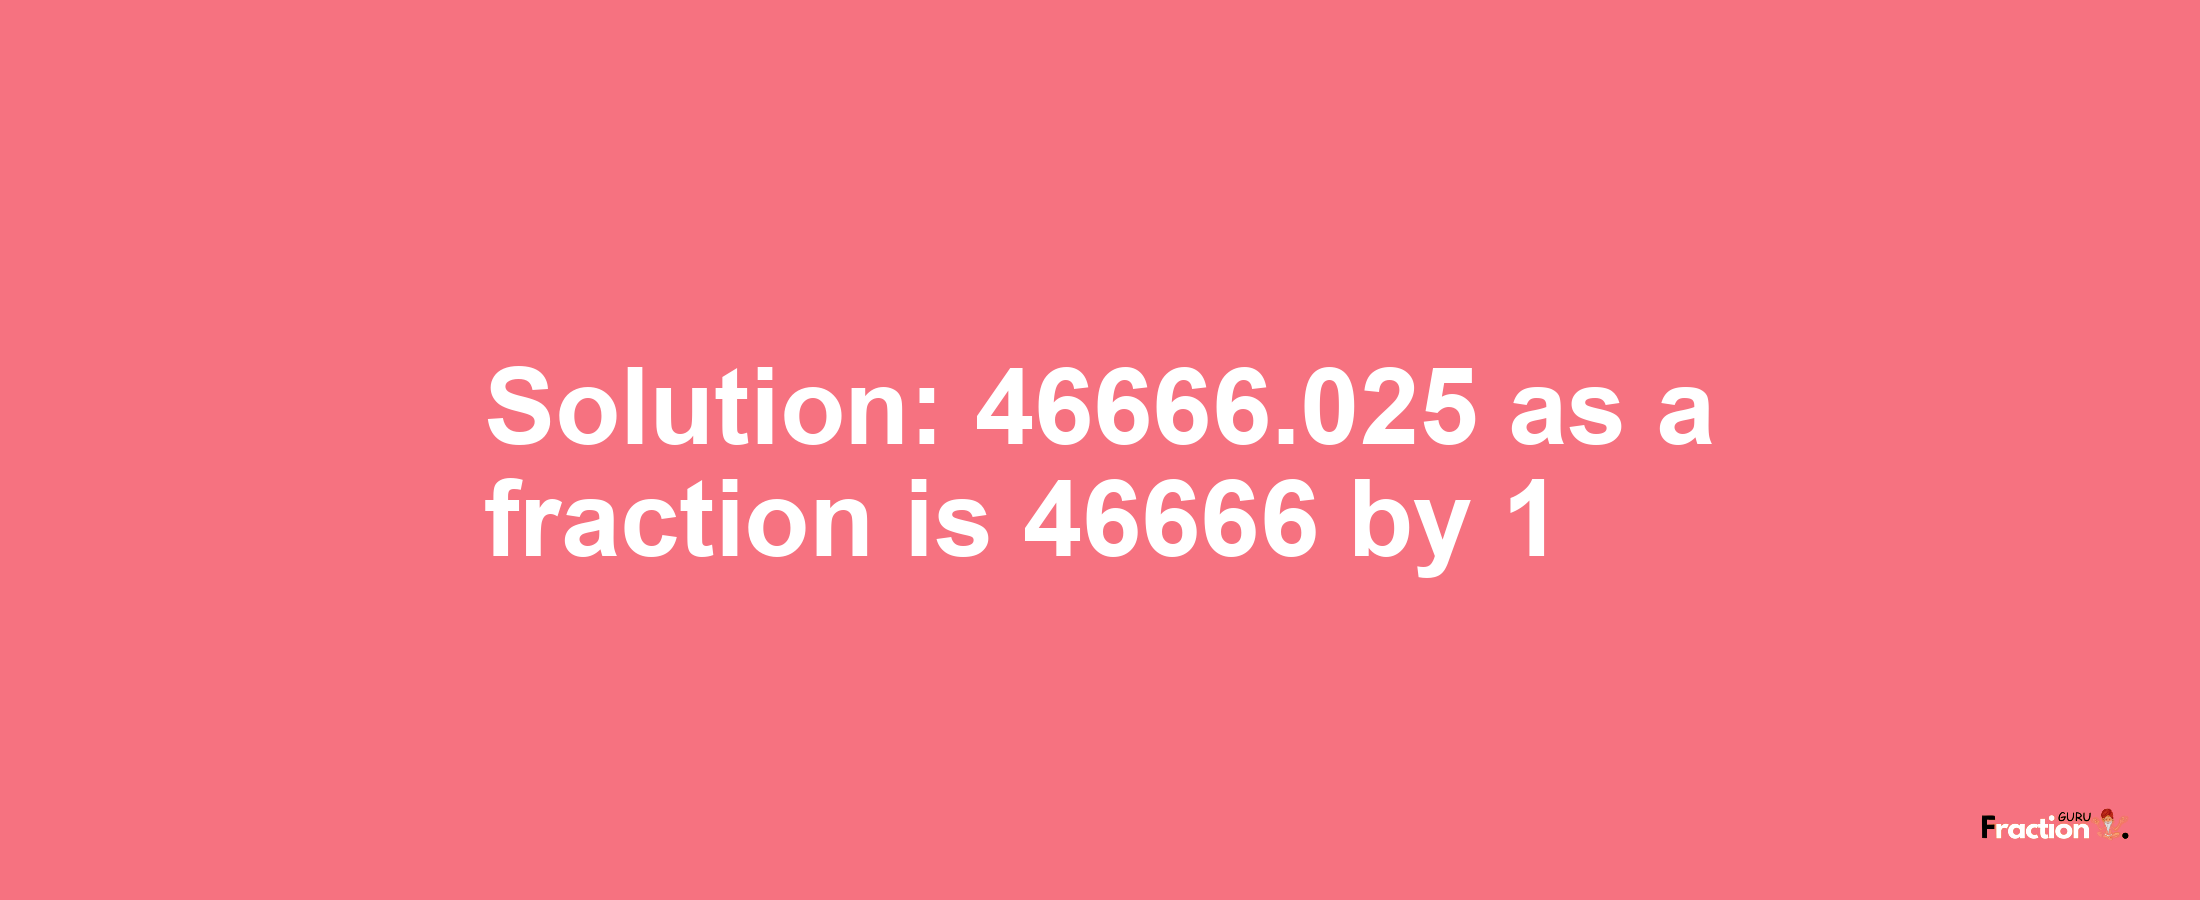 Solution:46666.025 as a fraction is 46666/1